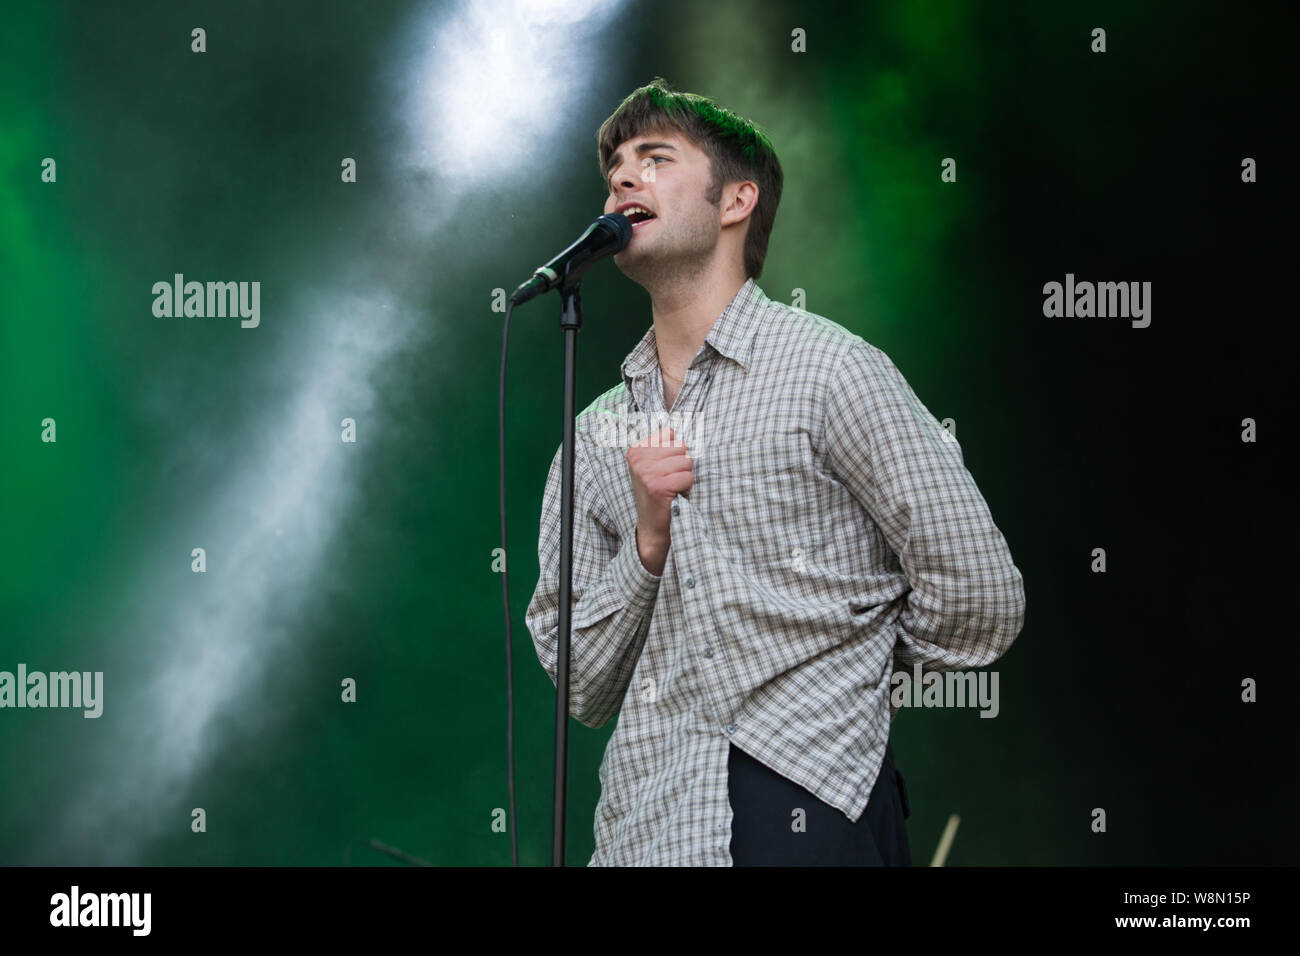 Oslo, Norway. 08th, August 2019. The Irish punk band Fontaines D.C. performs a live concert during the Norwegian music festival Øyafestivalen 2019 in Oslo. Here vocalist Grian Chatten is seen live on stage. (Photo credit: Gonzales Photo - Per-Otto Oppi). Stock Photo